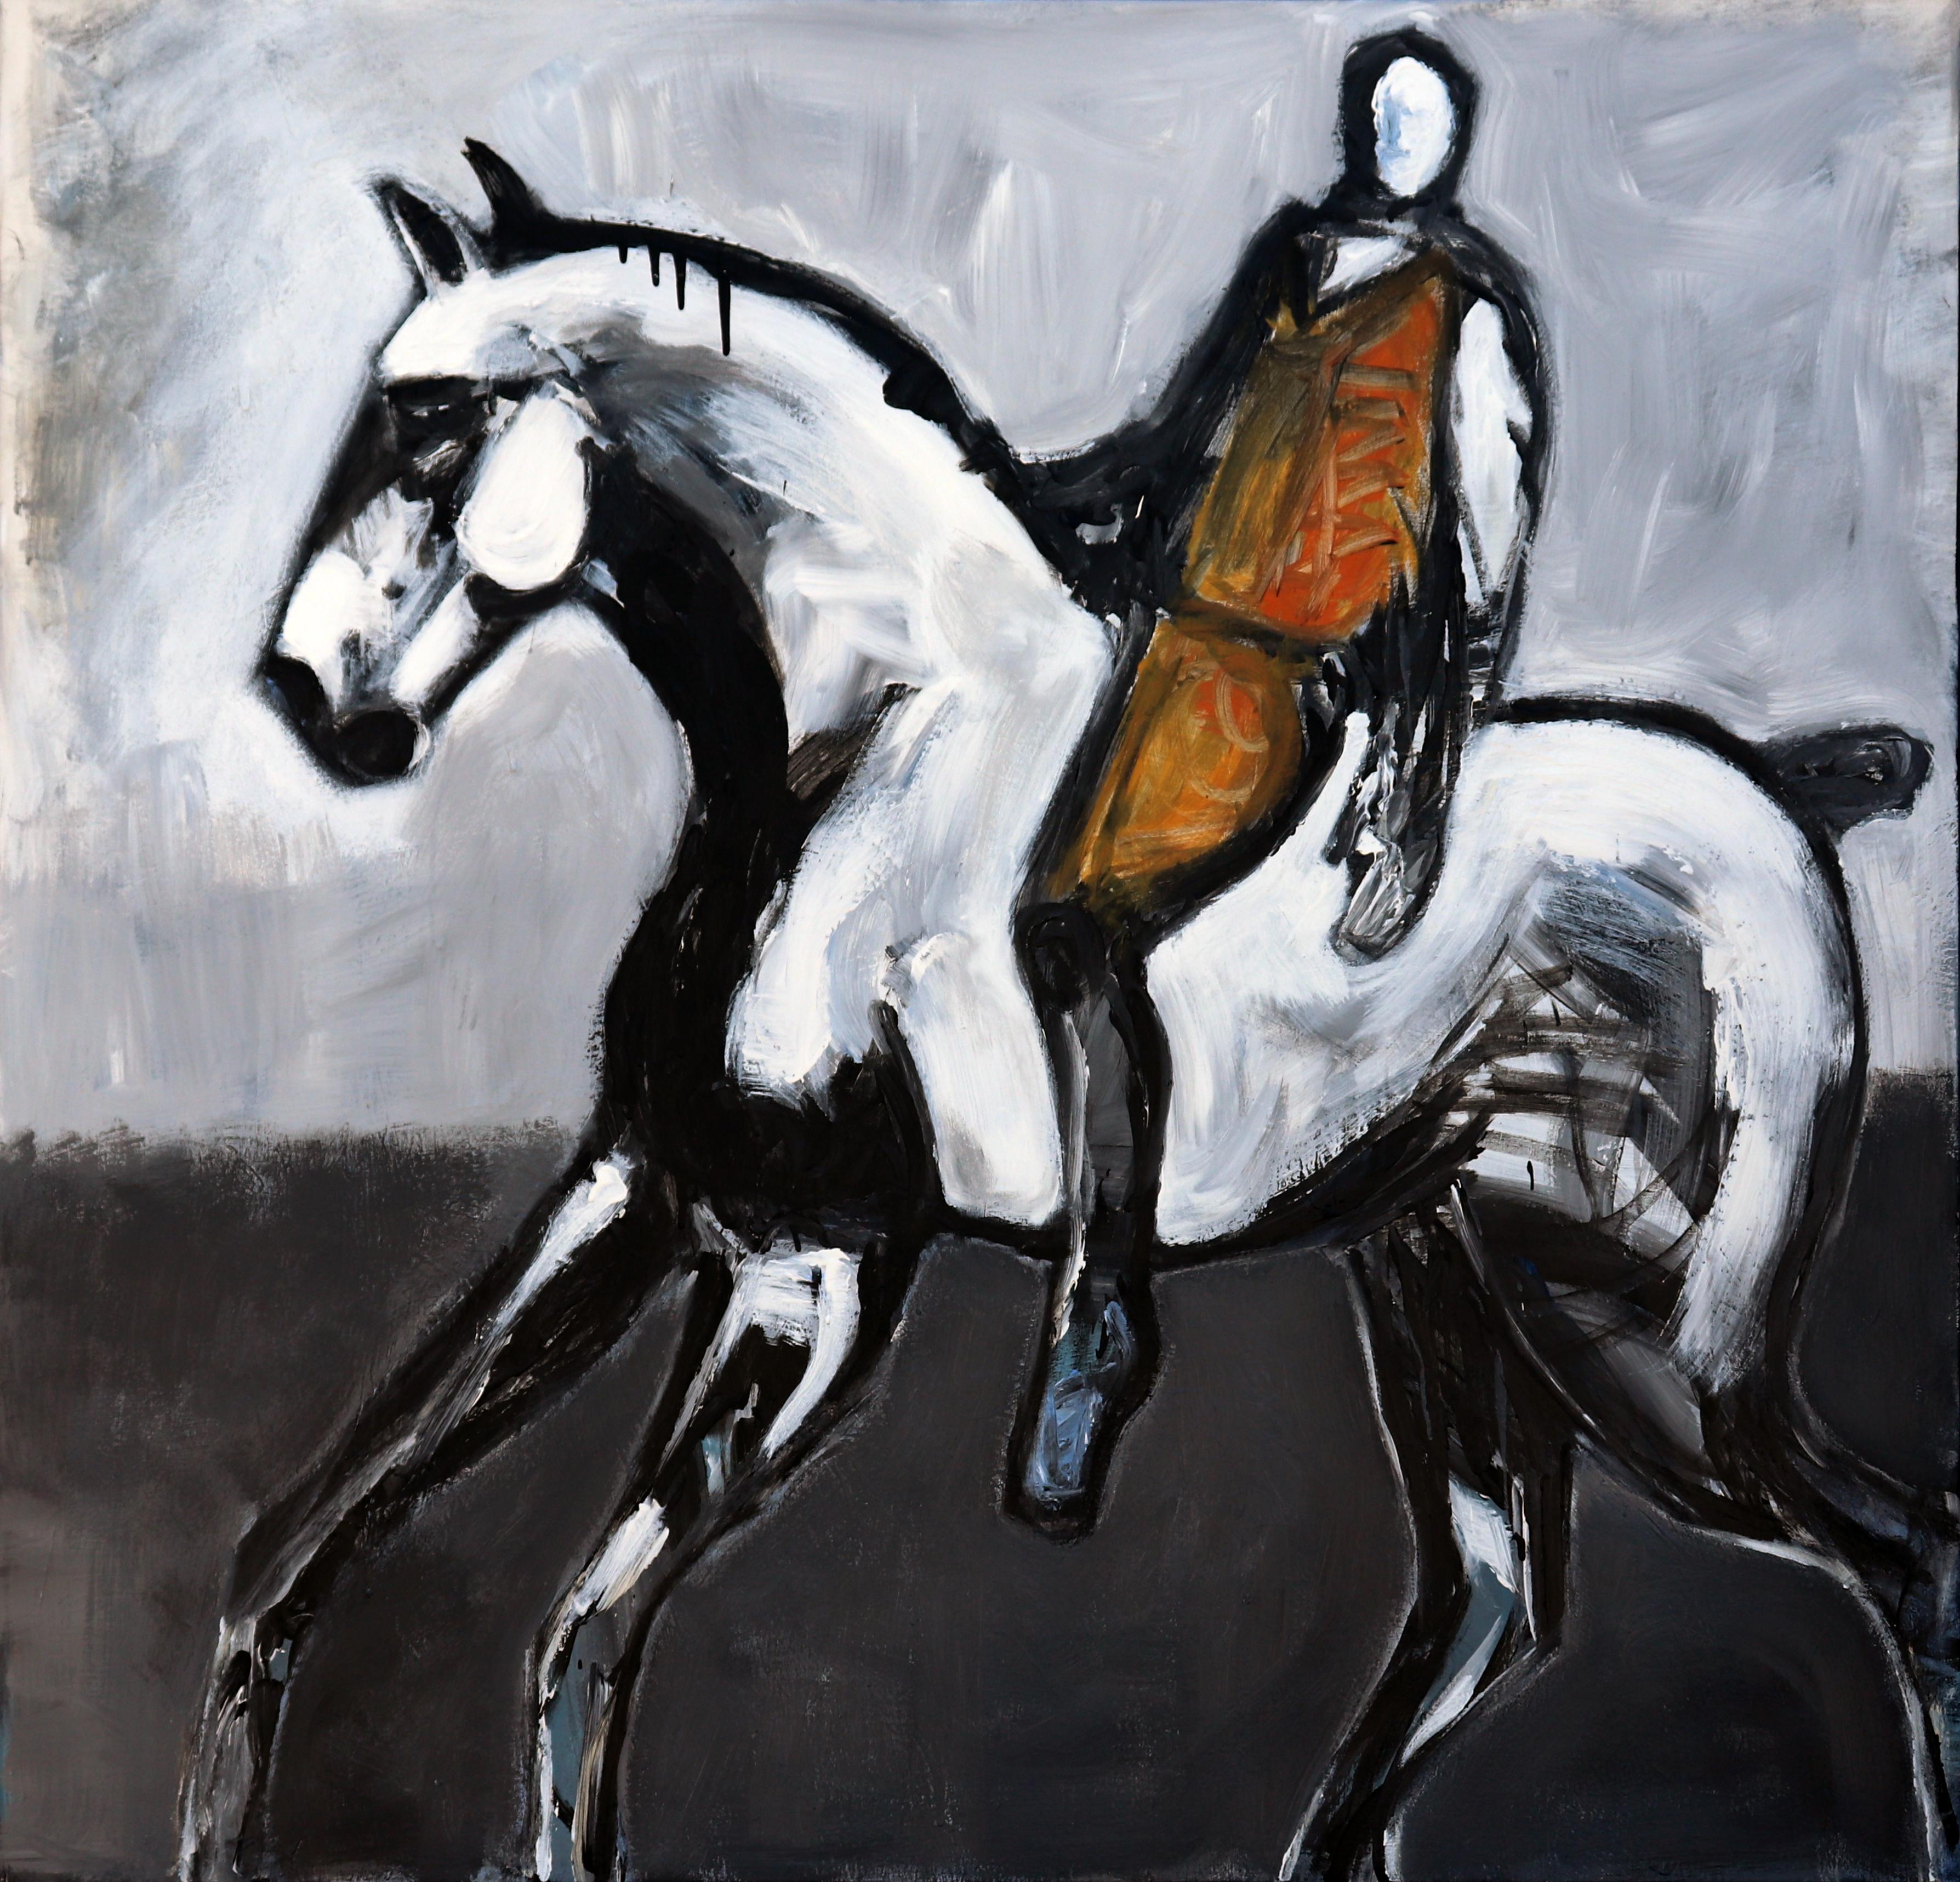 Spirit Horse ll - Synthetic Cubist Art by James Koskinas